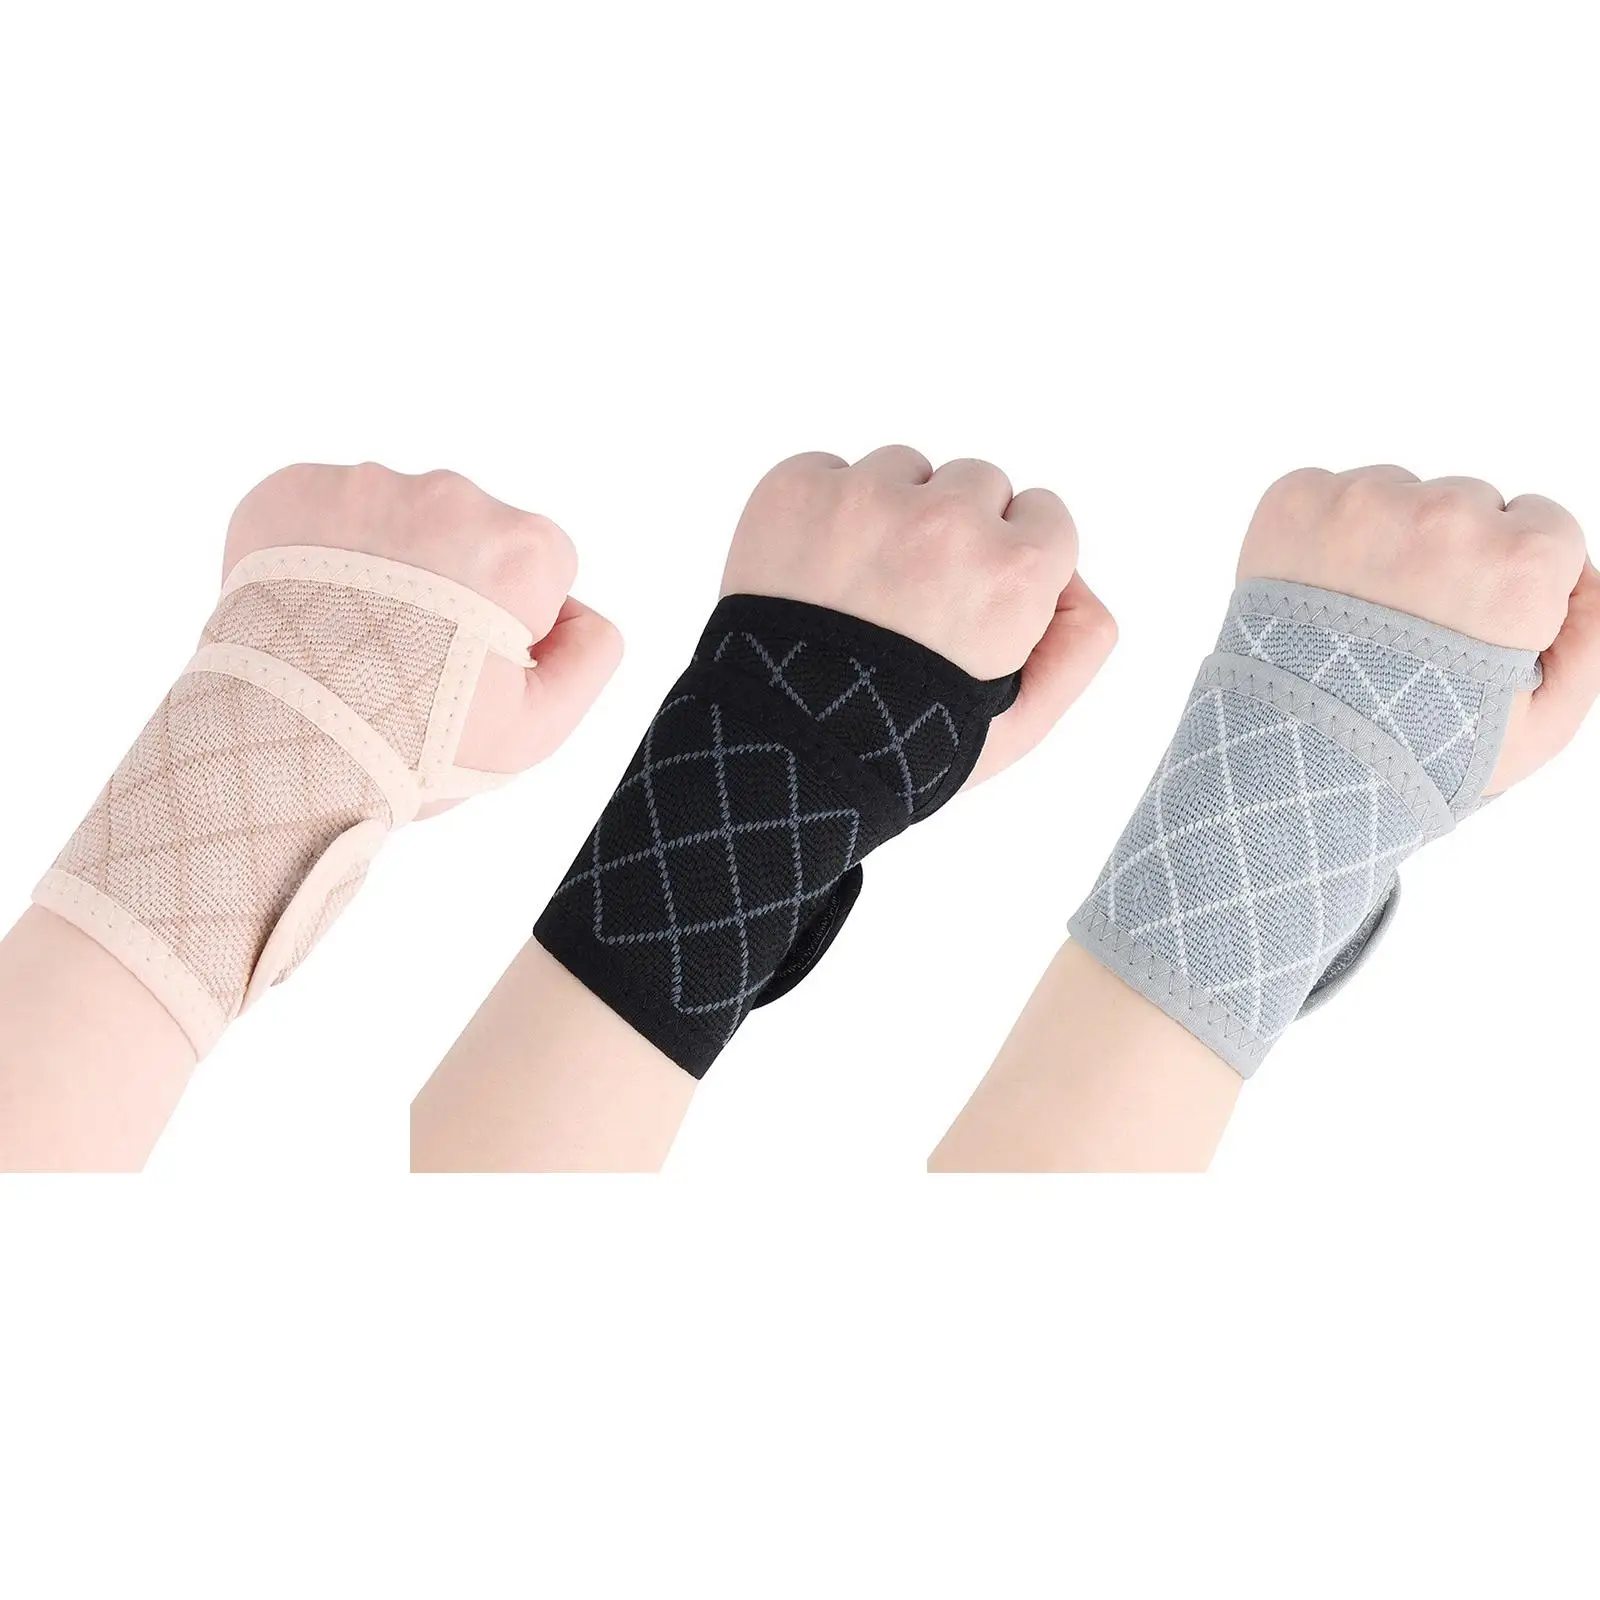 Wrist Compression Strap Sport Supporting Wrist Brace, for Biking,Running Nylon Spandex Material Accessory Easier wearing Yoga